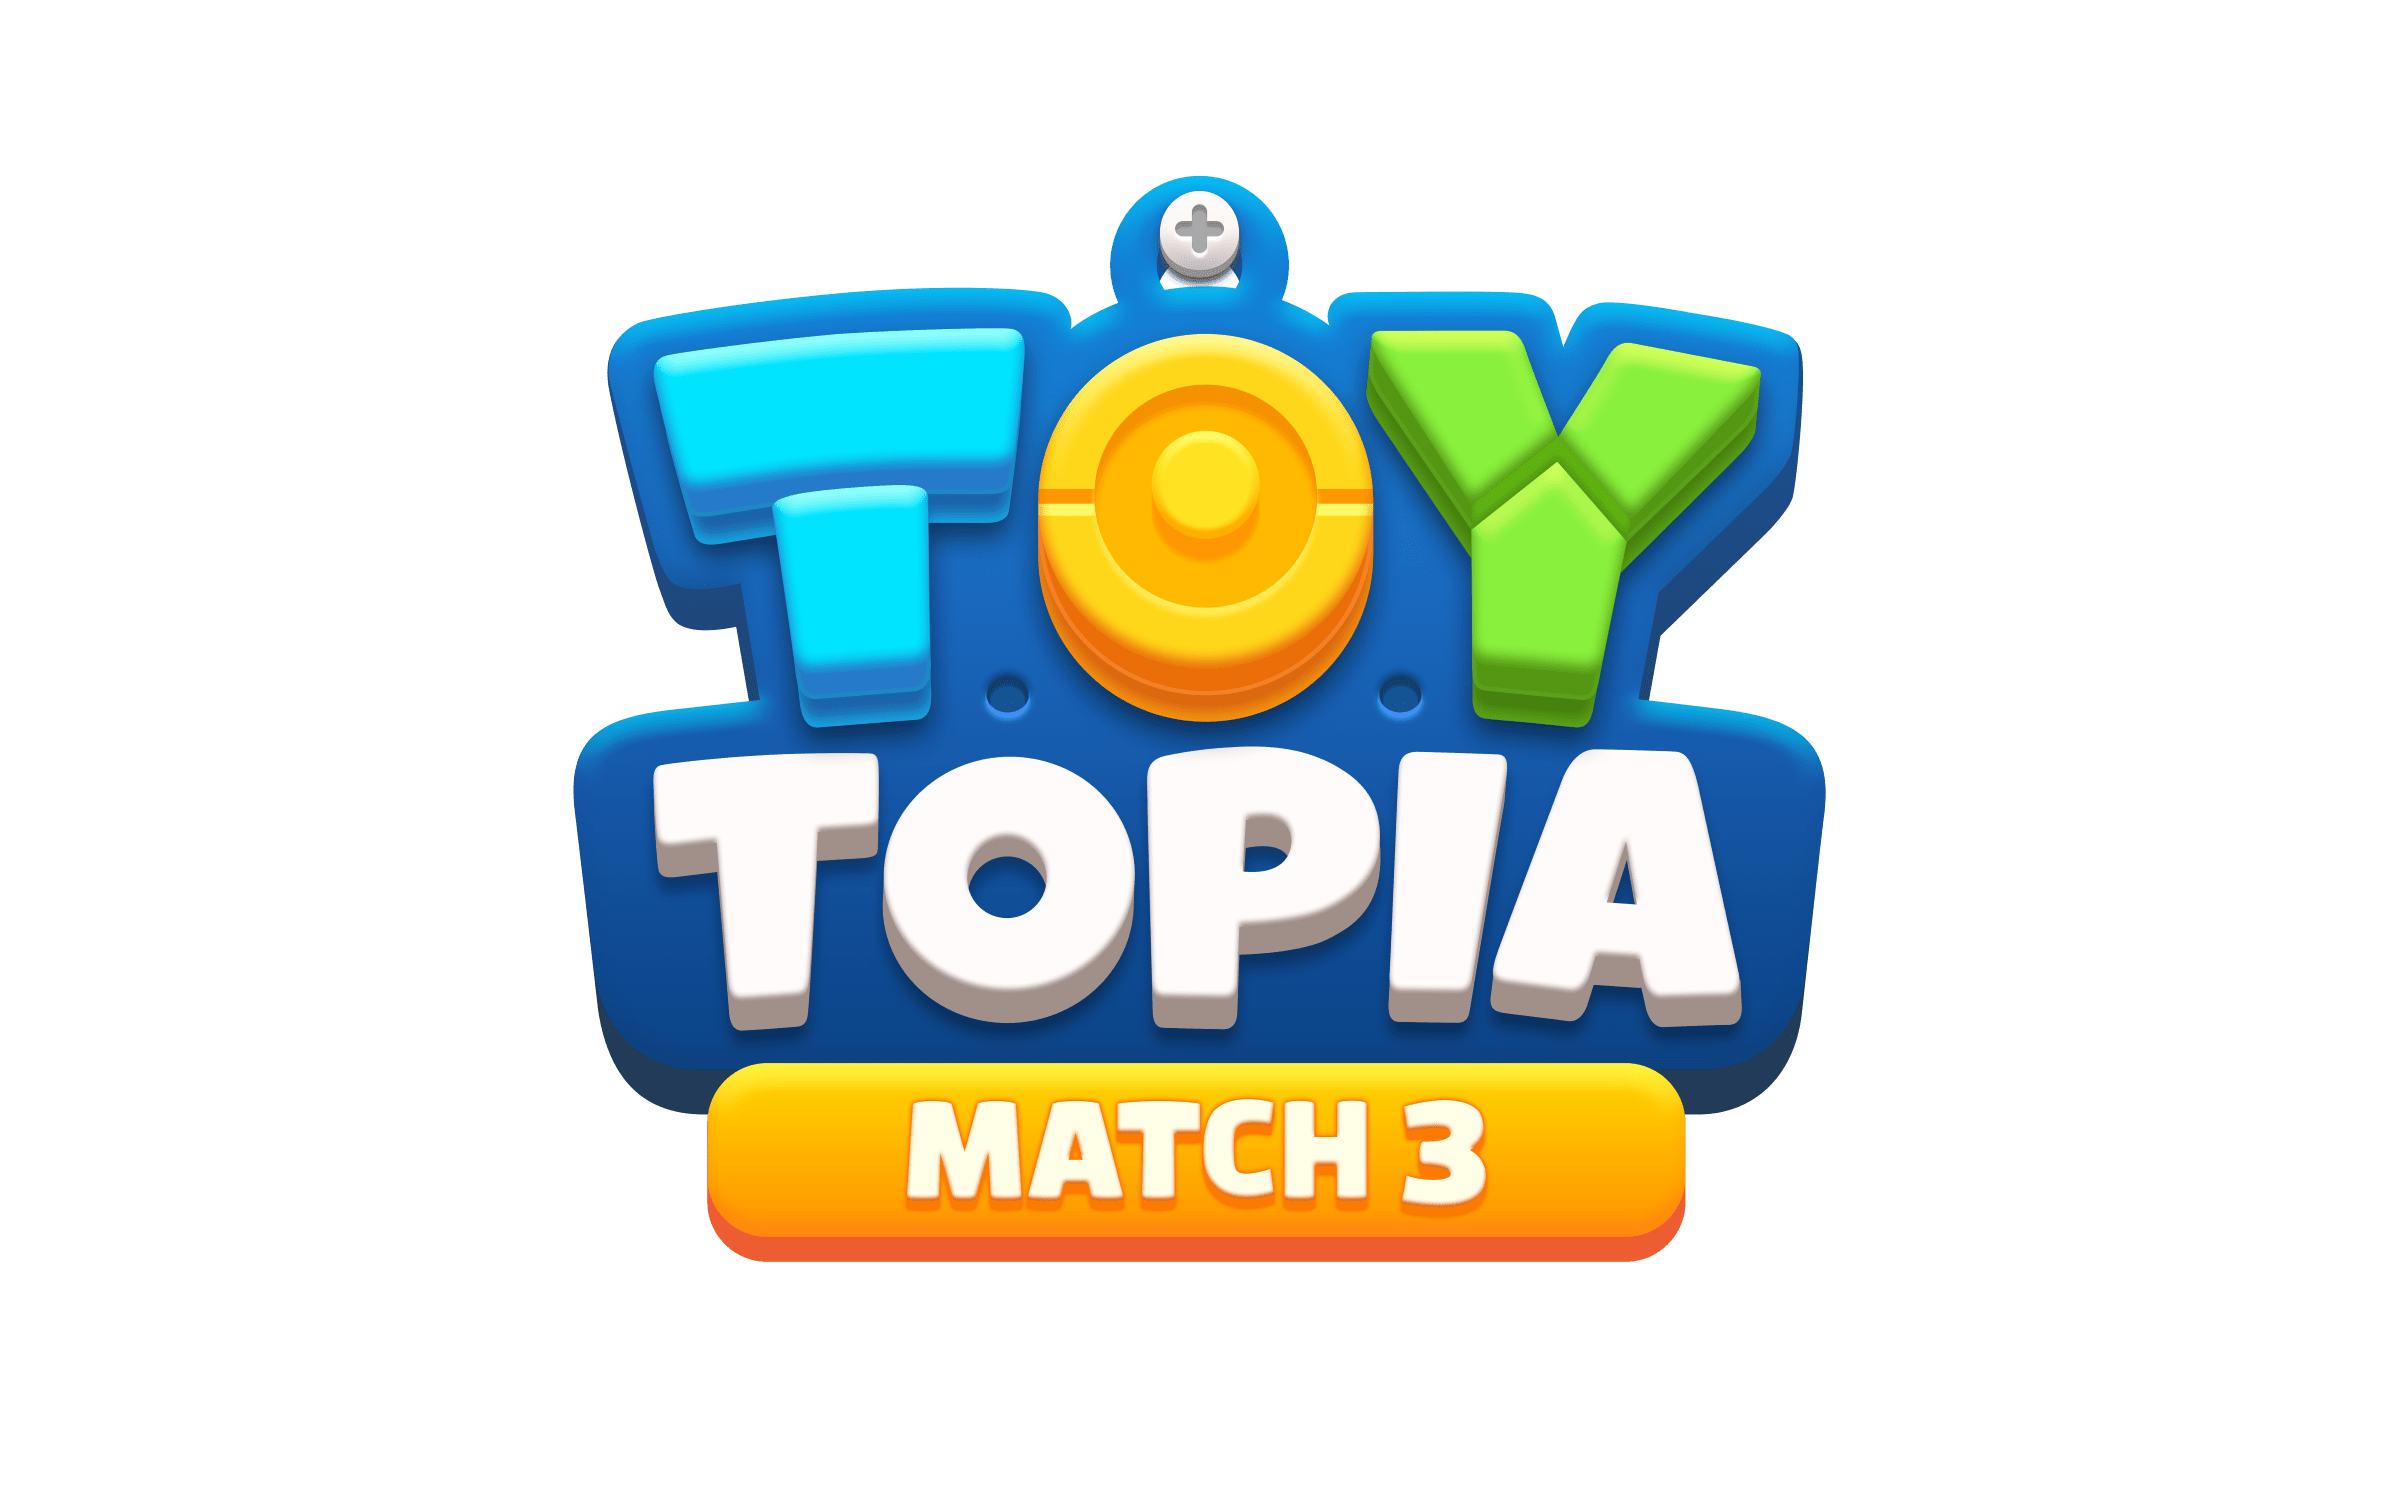 ToyTopia, the Hotly Anticipated Match-3 Puzzler from Webzen, Has Soft Launched in Select Regions